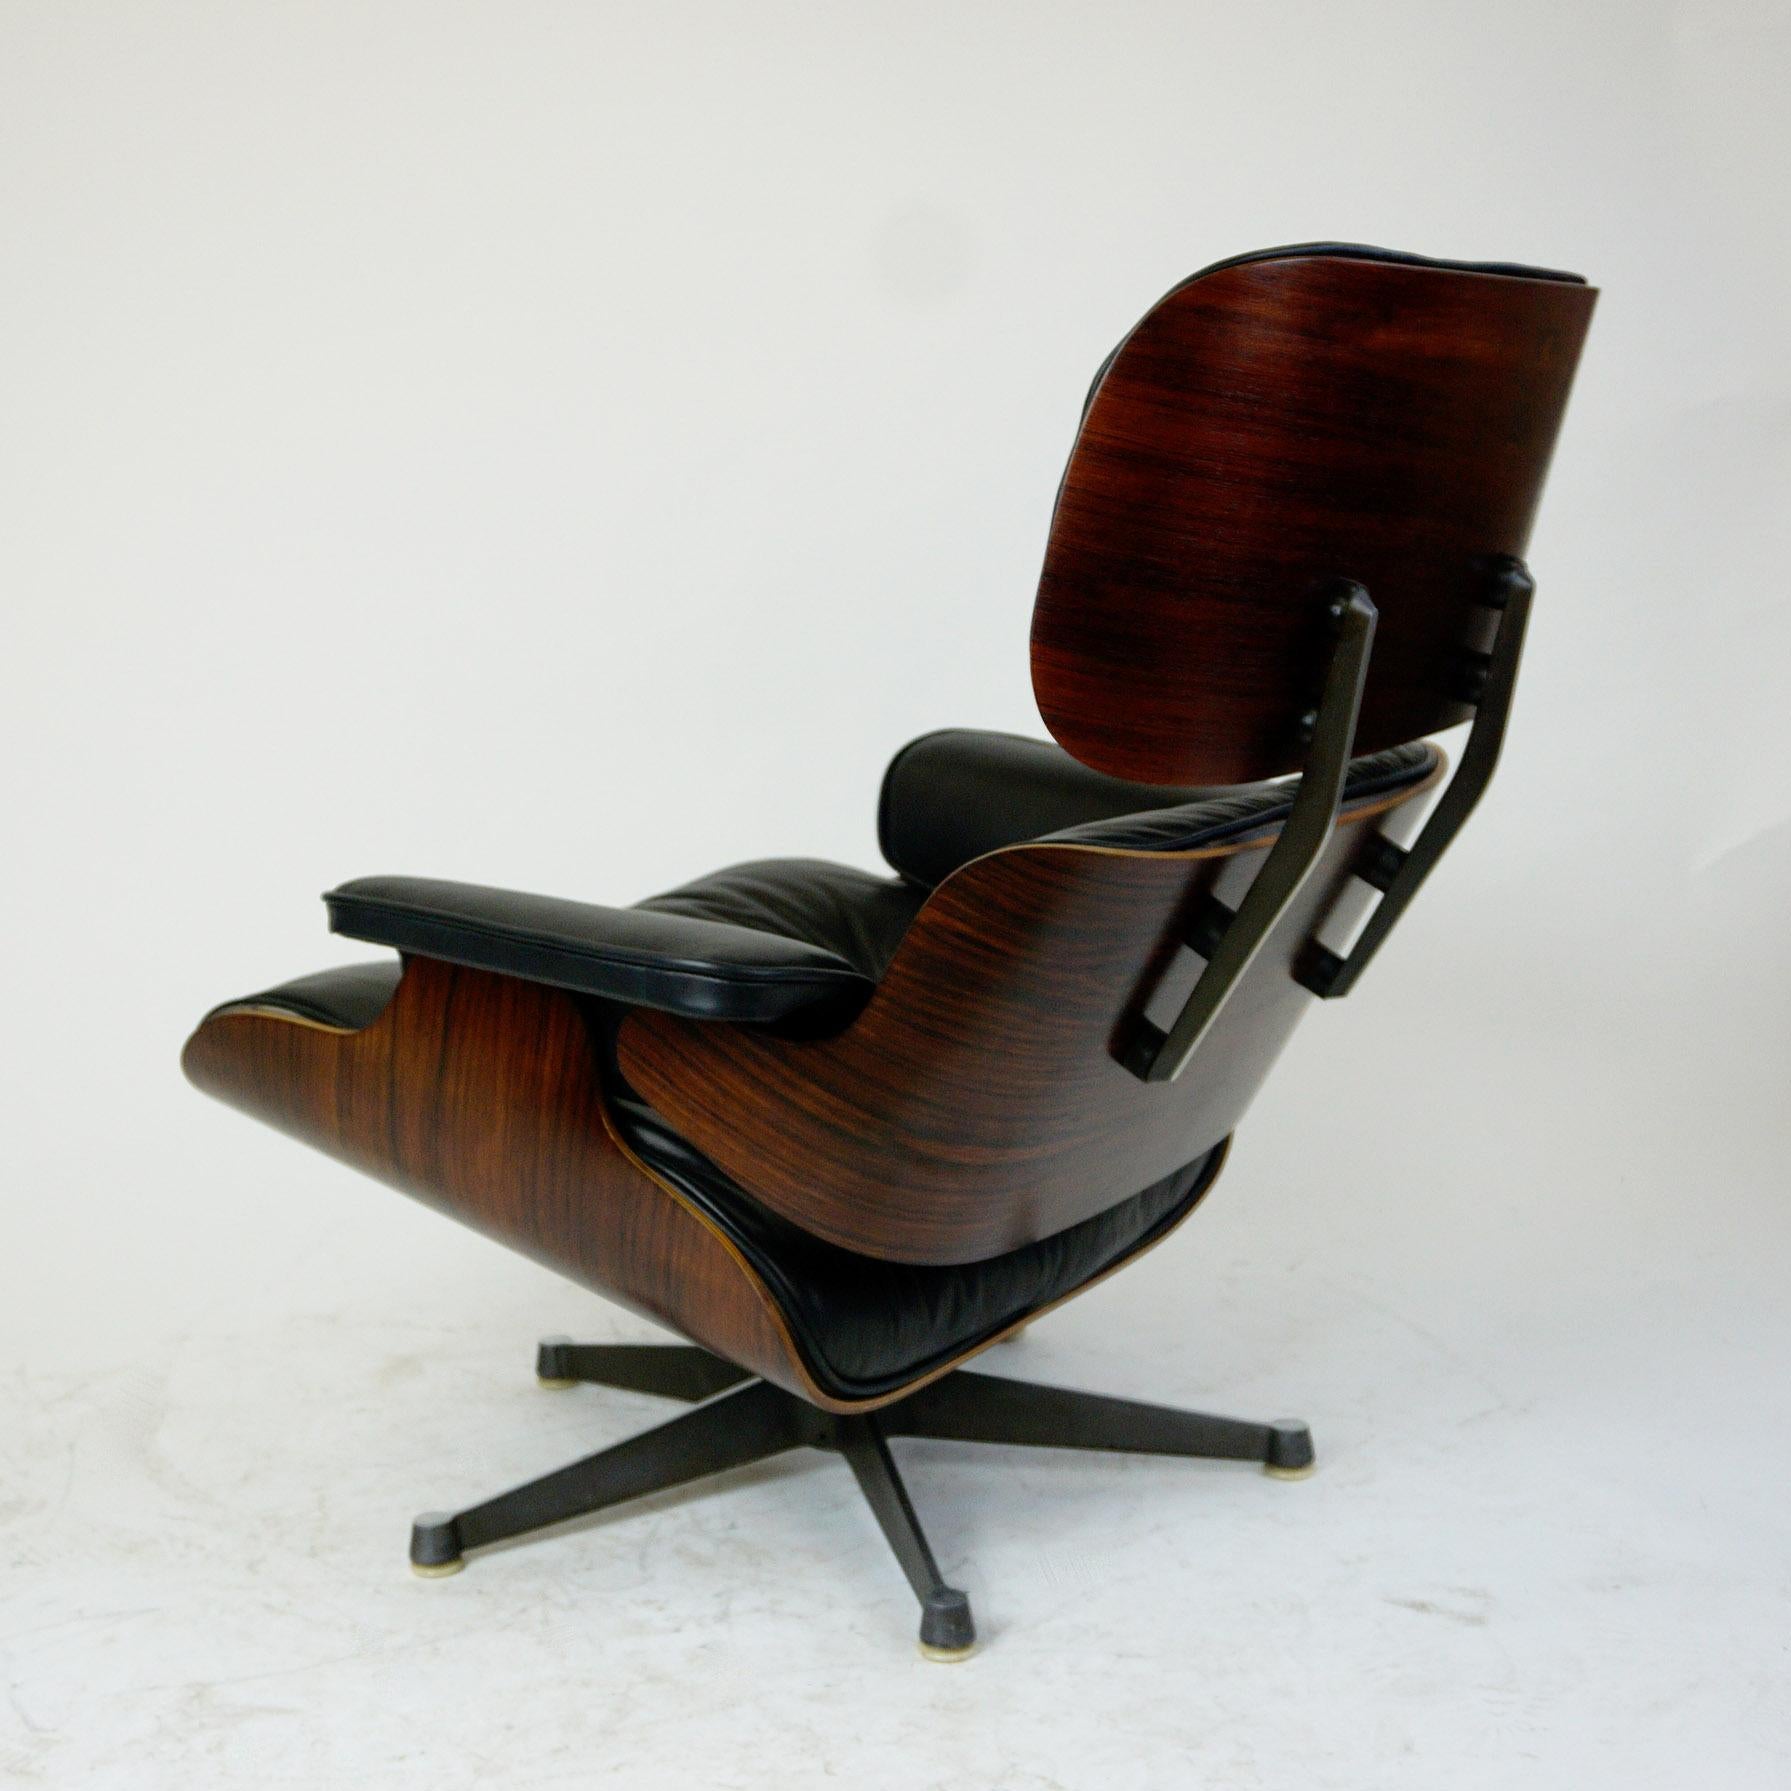 Italian Rosewood and Black Leather Eames Lounge Chair by ICF for Herman Miller